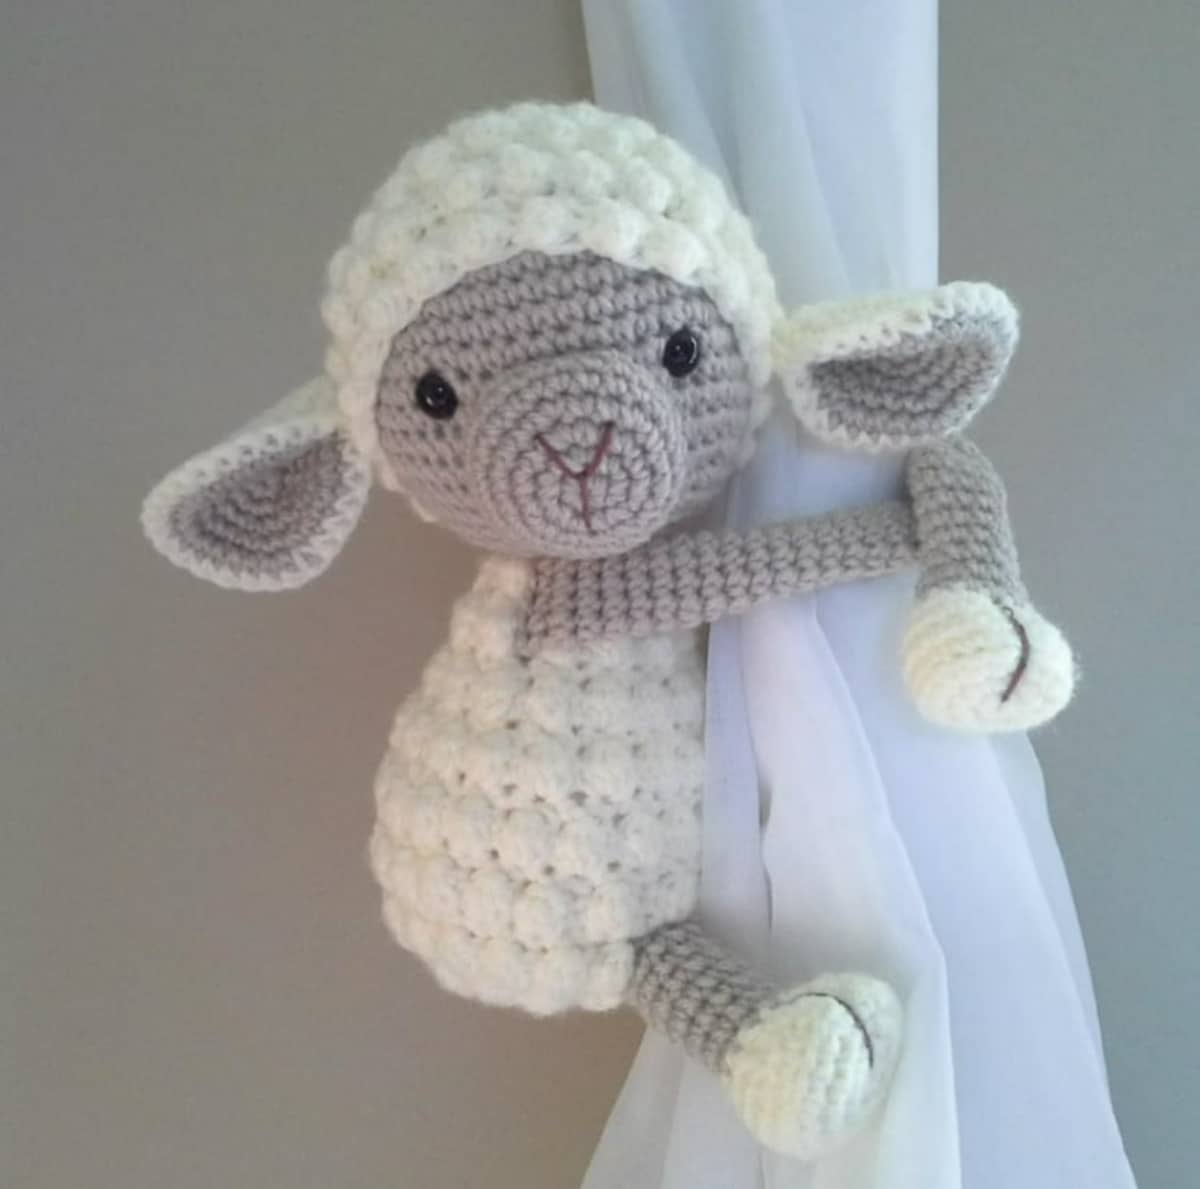 White crochet lamb with a textured body and head and a brown face and legs wrapped around a white curtain.